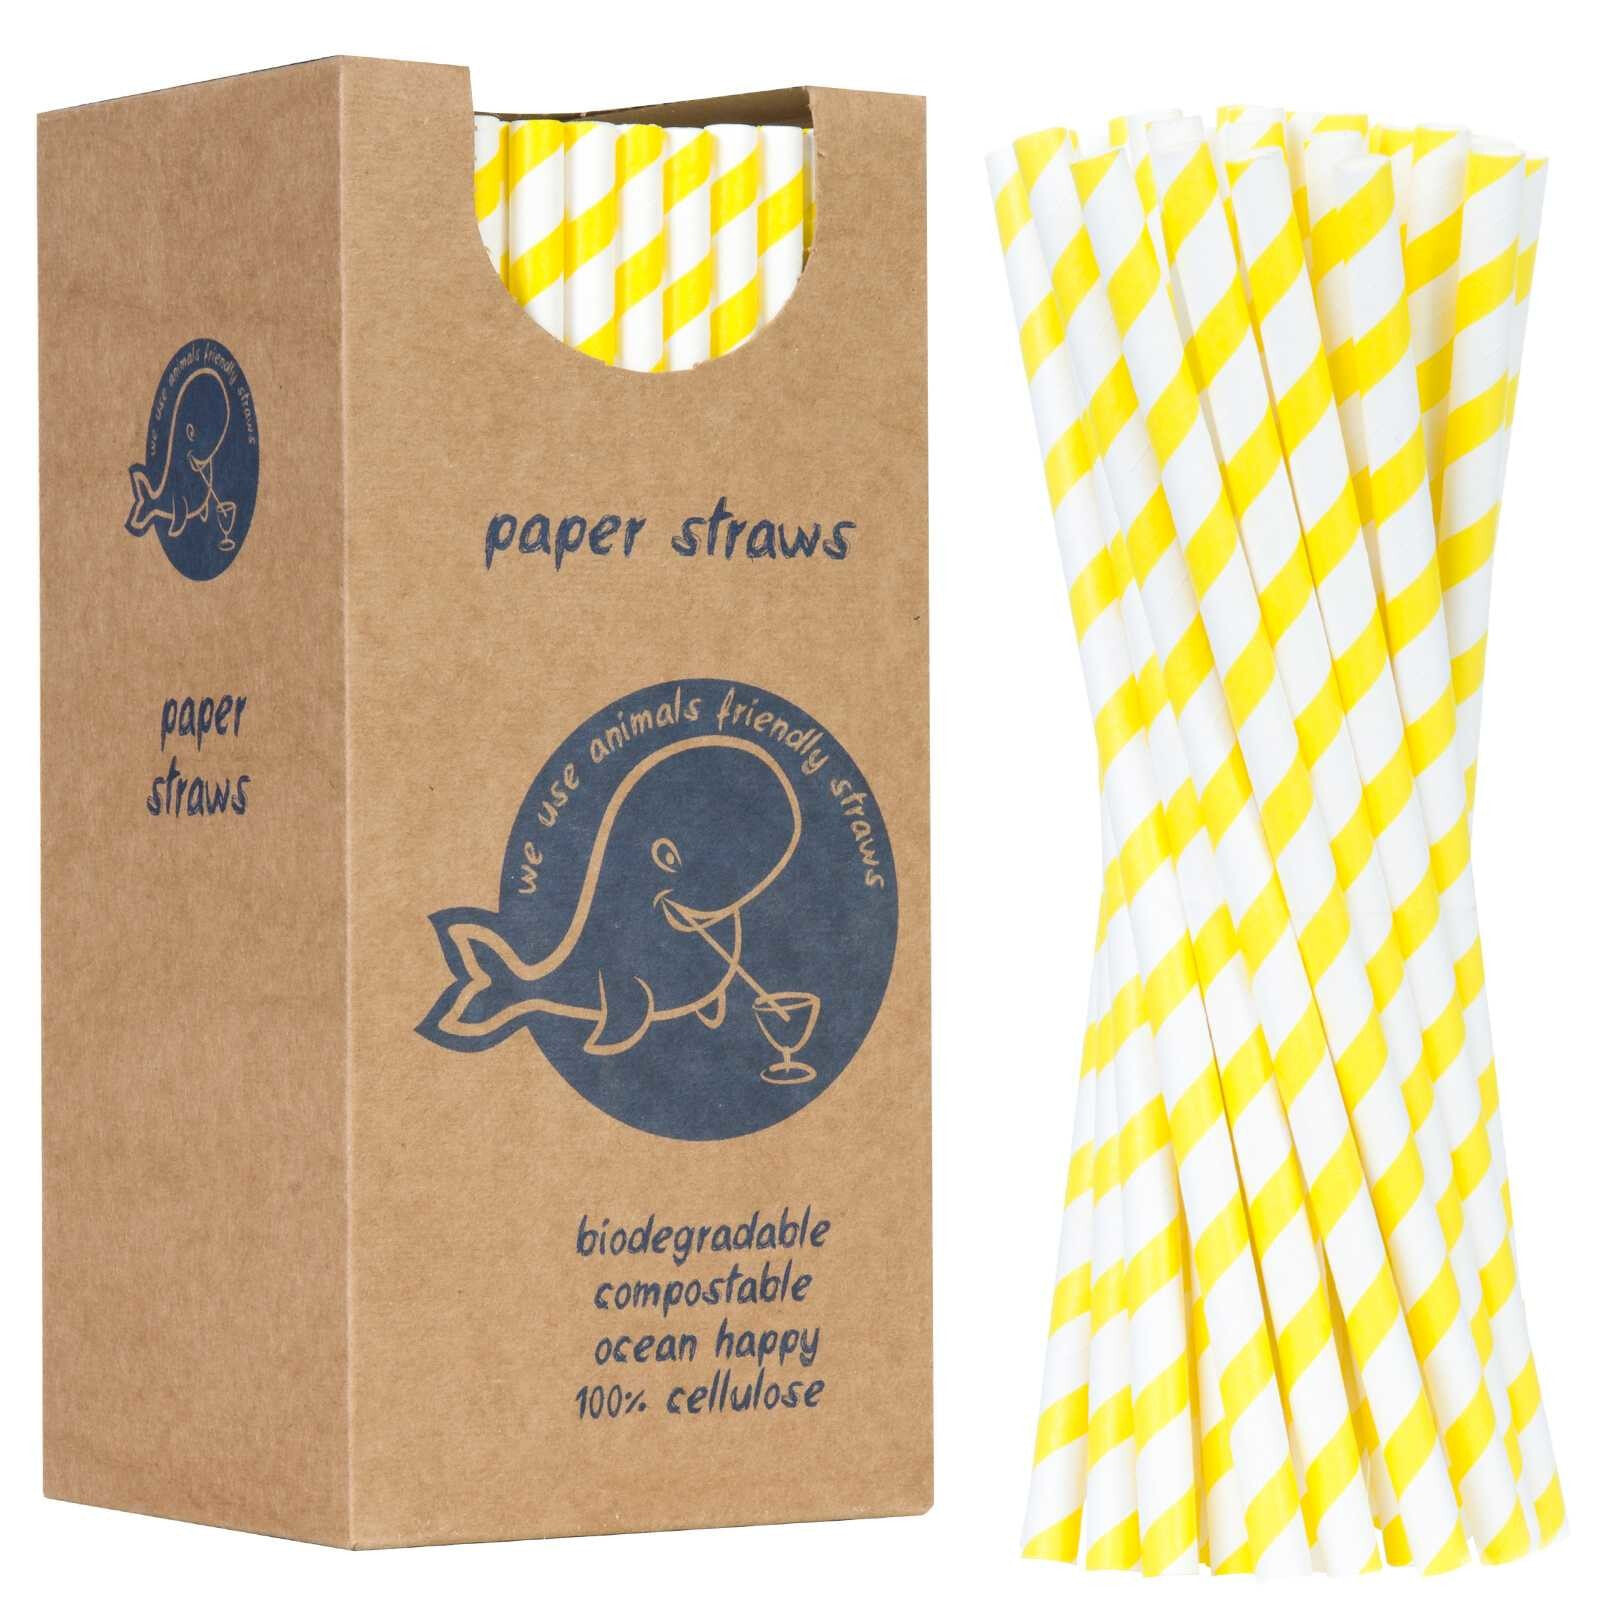 Paper straws BIO ecological PAPER STRAWS 6 / 205mm - white and yellow 250 pcs.